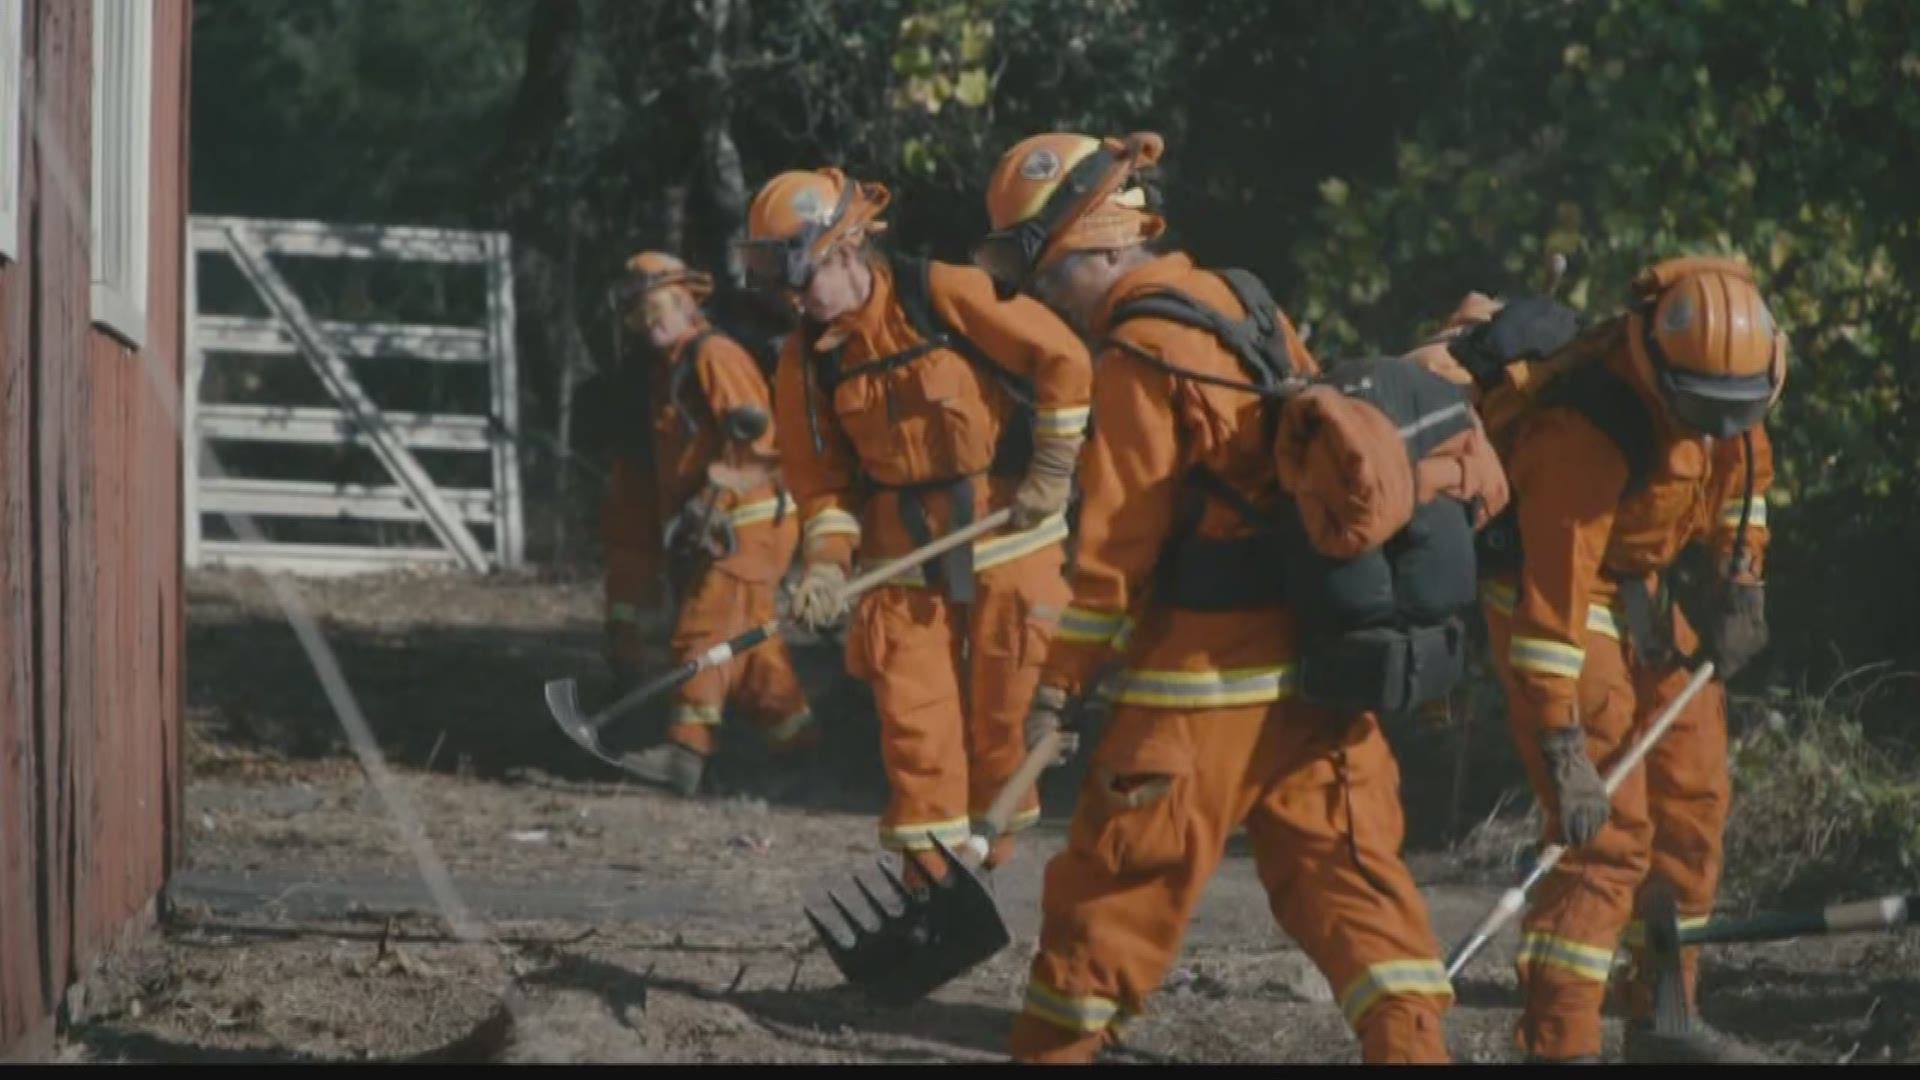 Inmate firefighters aren't an uncommon sight on California's fire lines and some inmates train in fire camps with the help of Cal Fire. (Oct. 14, 2017)